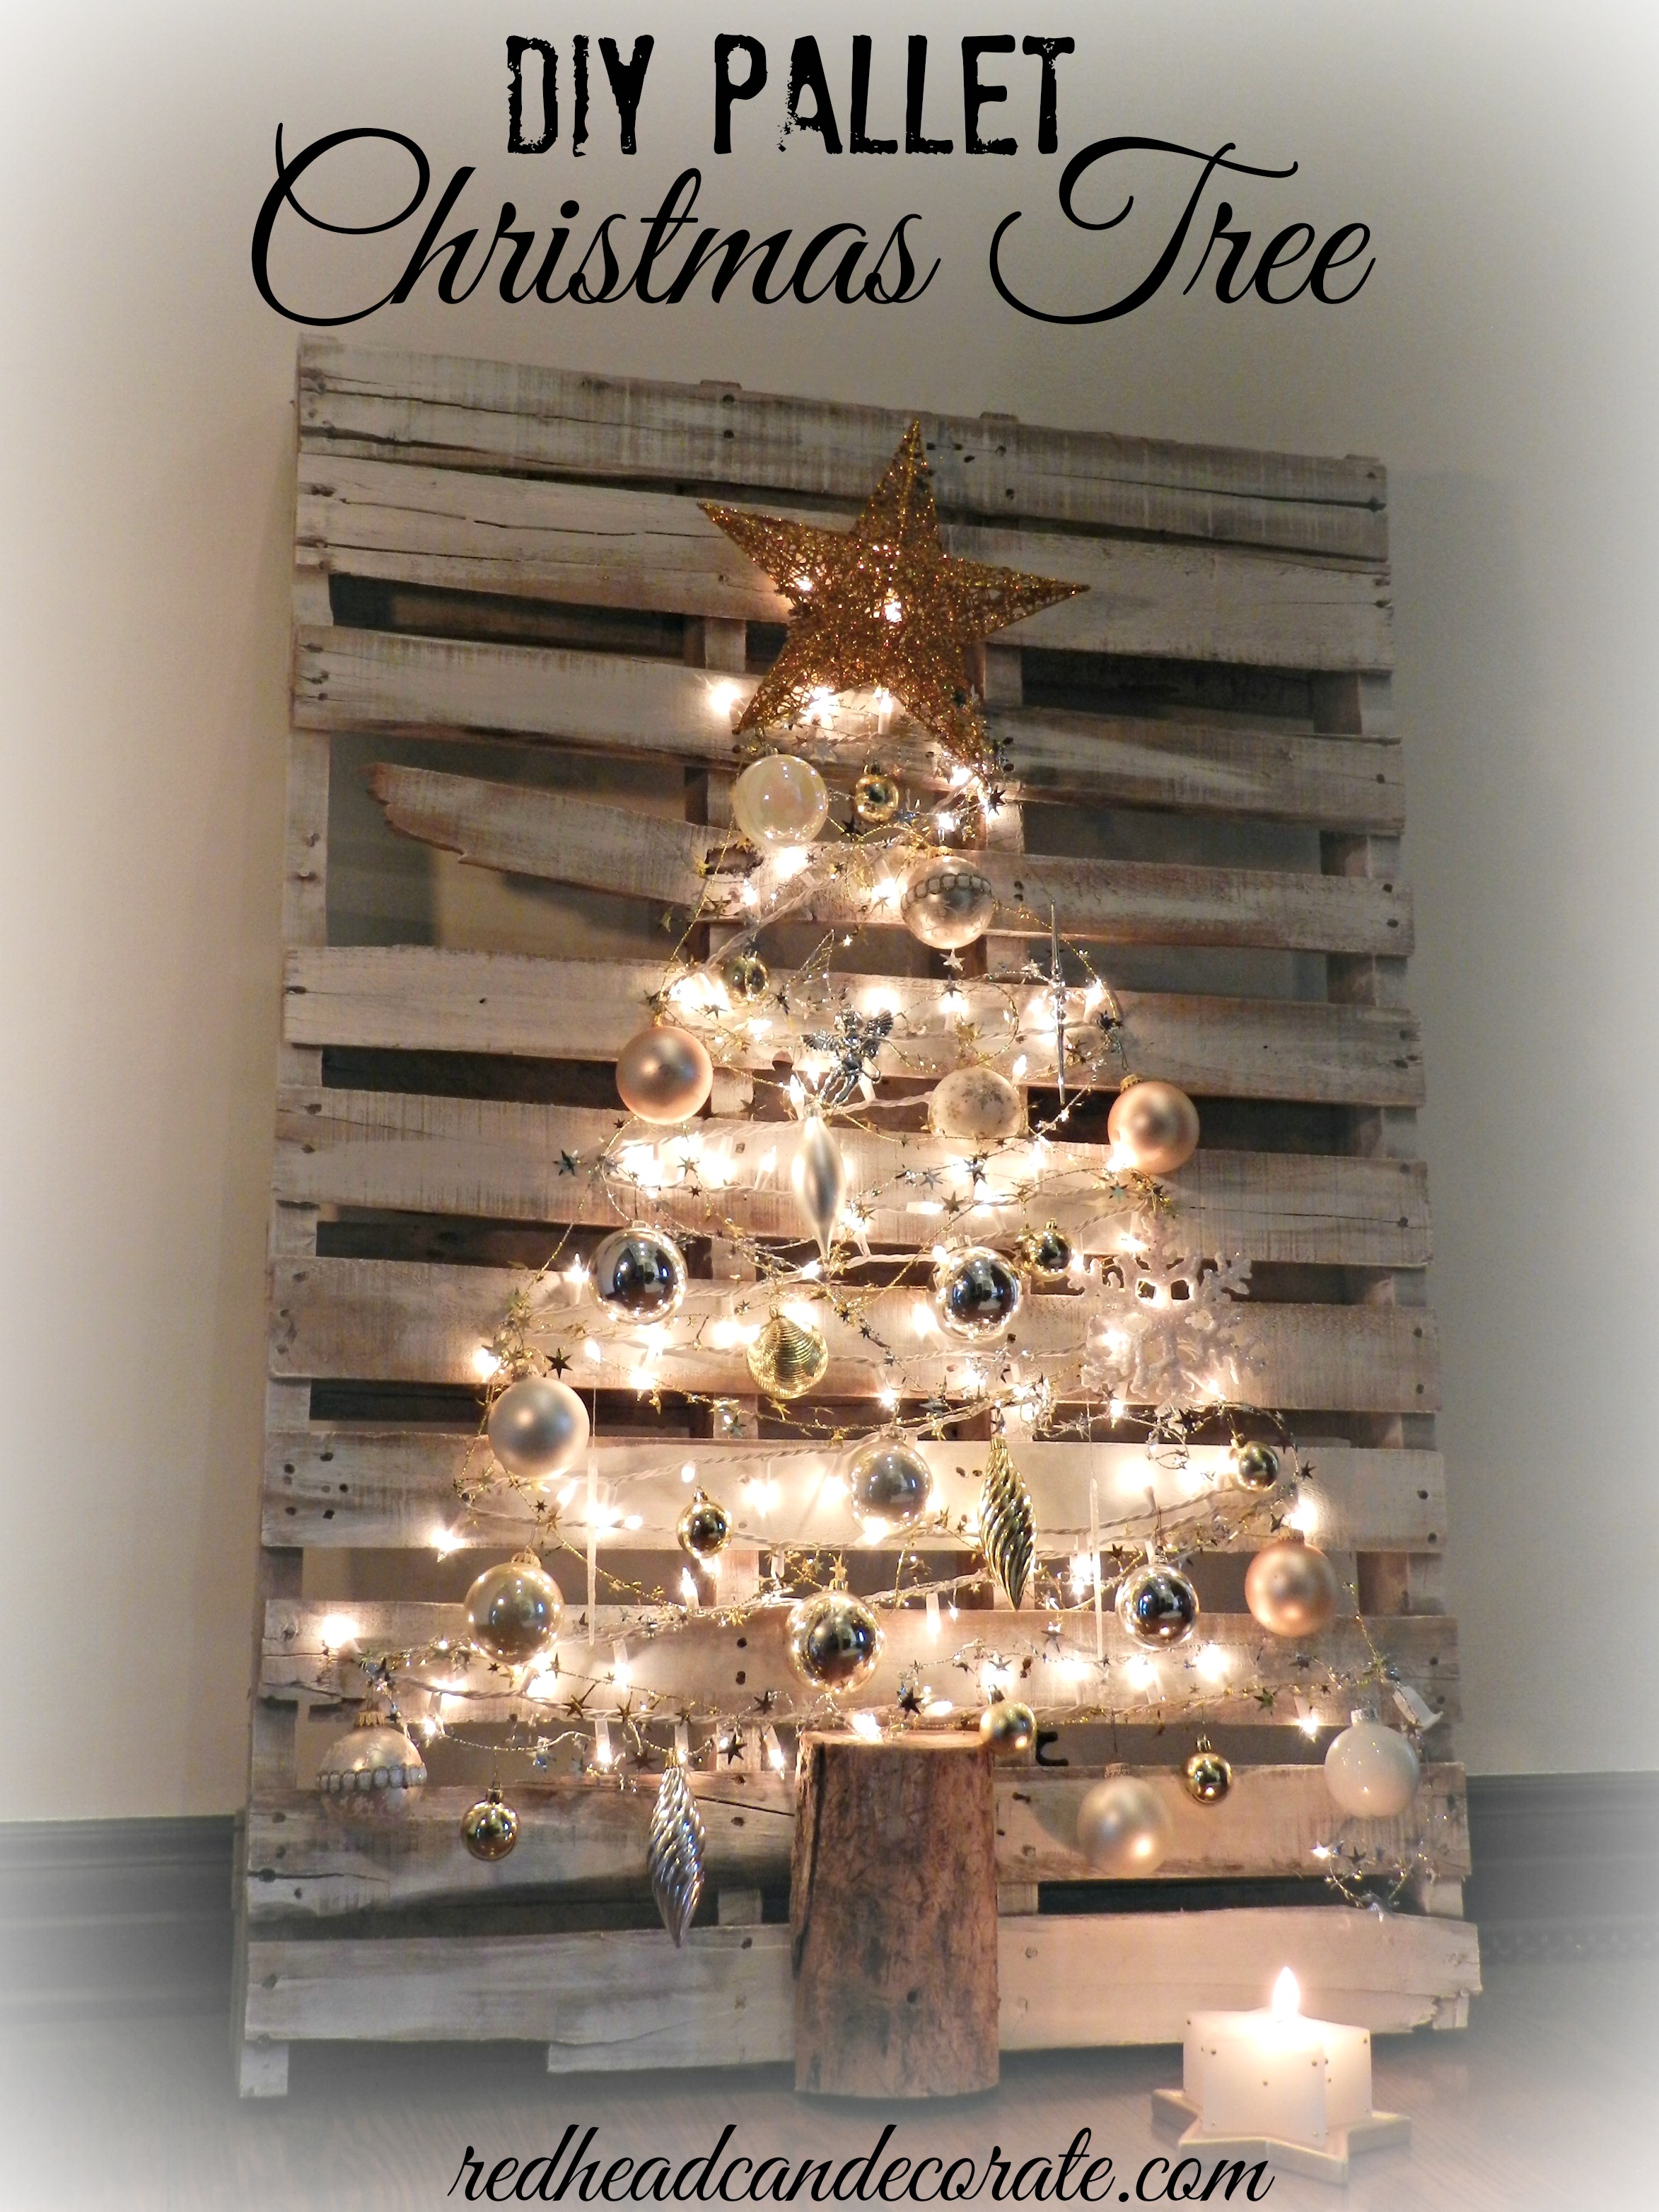 diy-pallet-christmas-tree-by-redhead-can-decorate